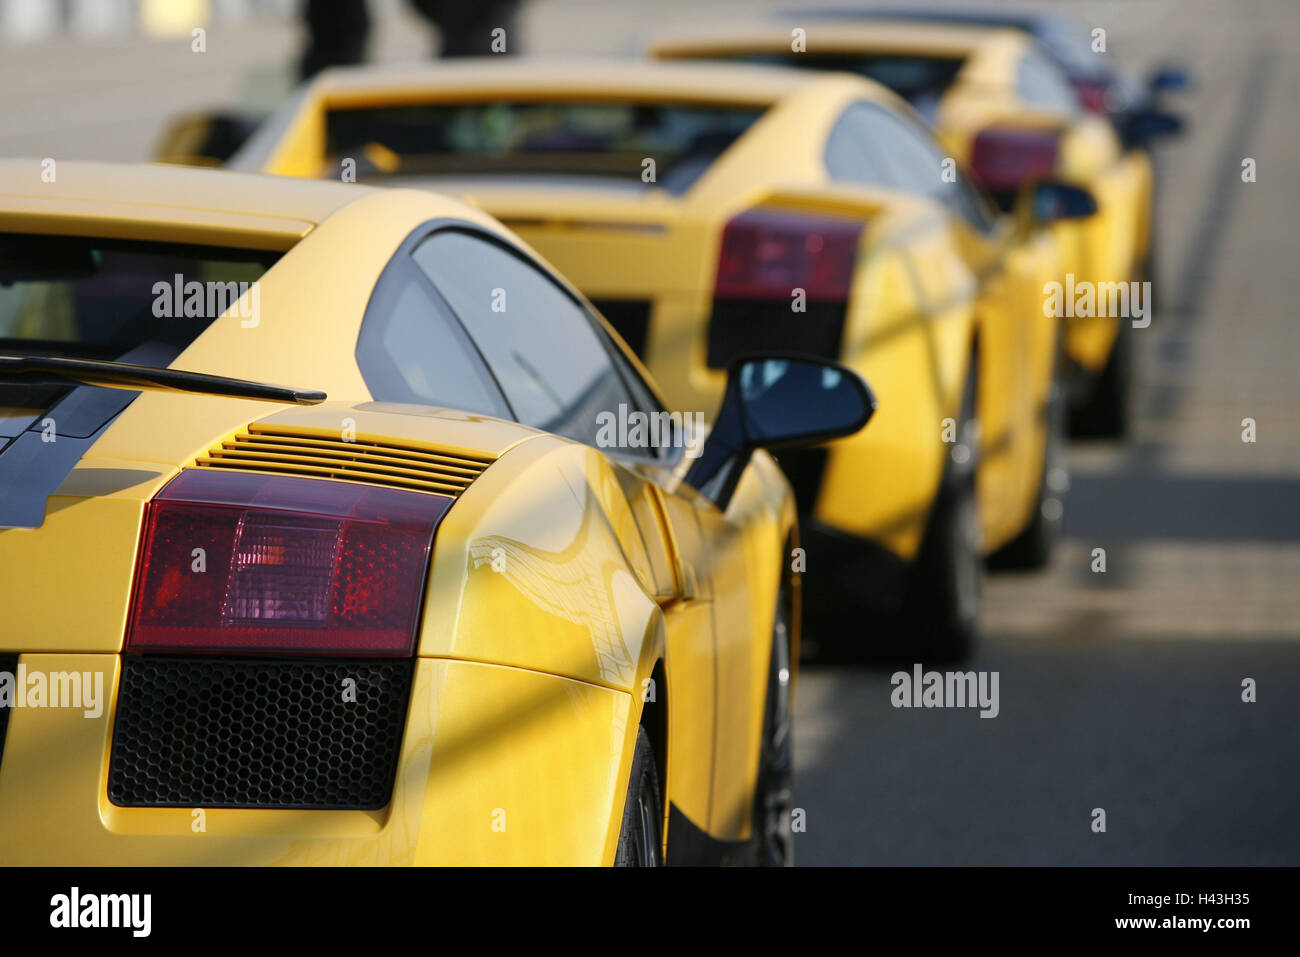 Lamborghinis, yellow, rear view, Saxon's ring, 3rd formation, cars, outside, three, Lamborghini, luxury, luxury cars, sports cars, nobly, exclusively, stand, one after the other, curled, outside, Stock Photo